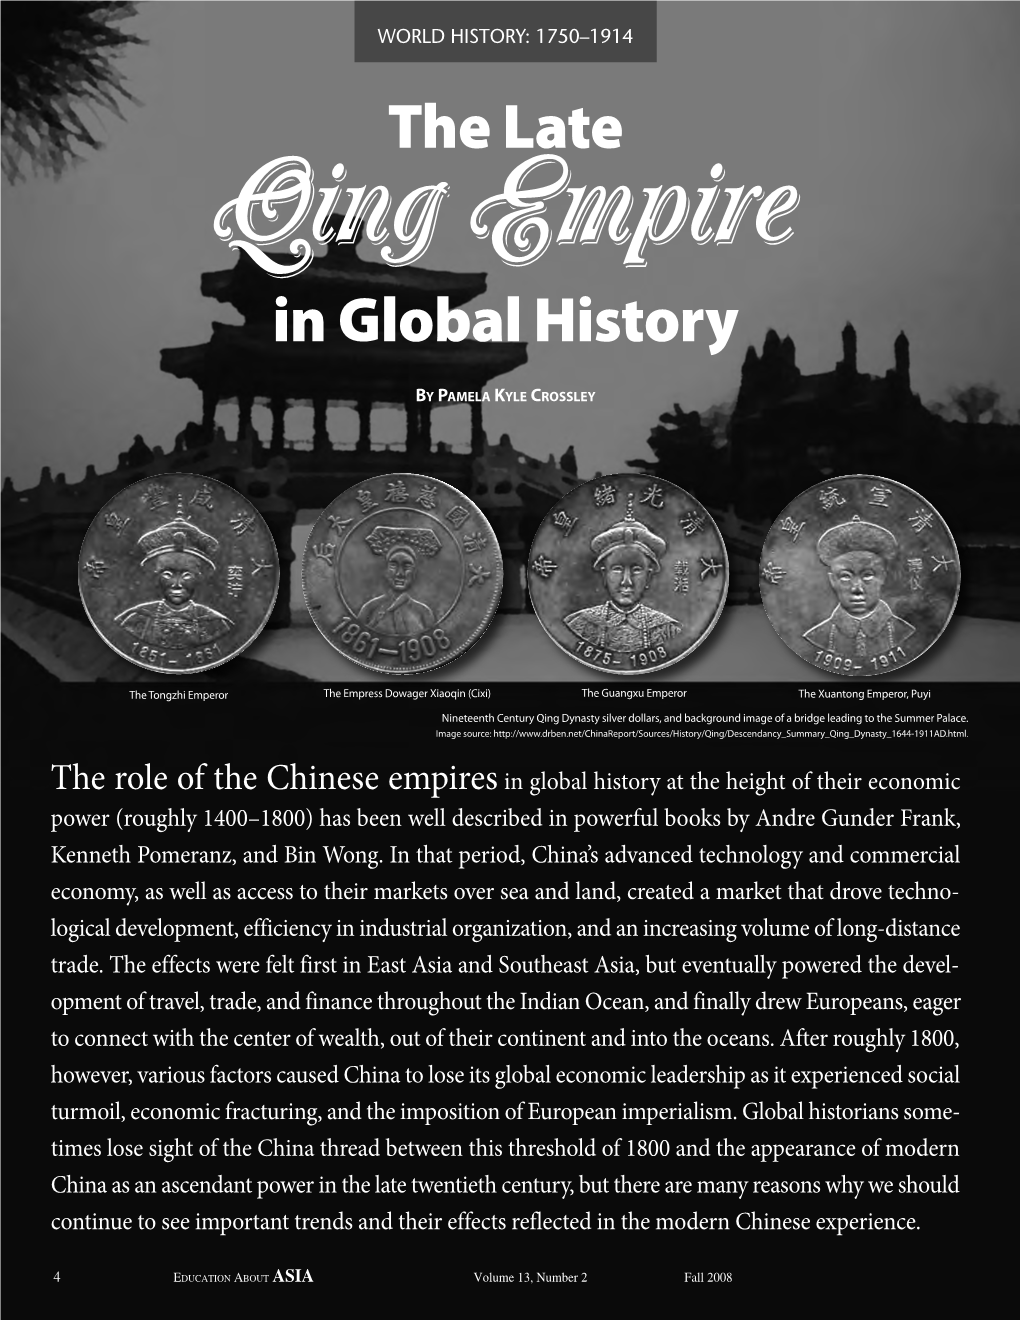 The Late Qing Empire in Global History